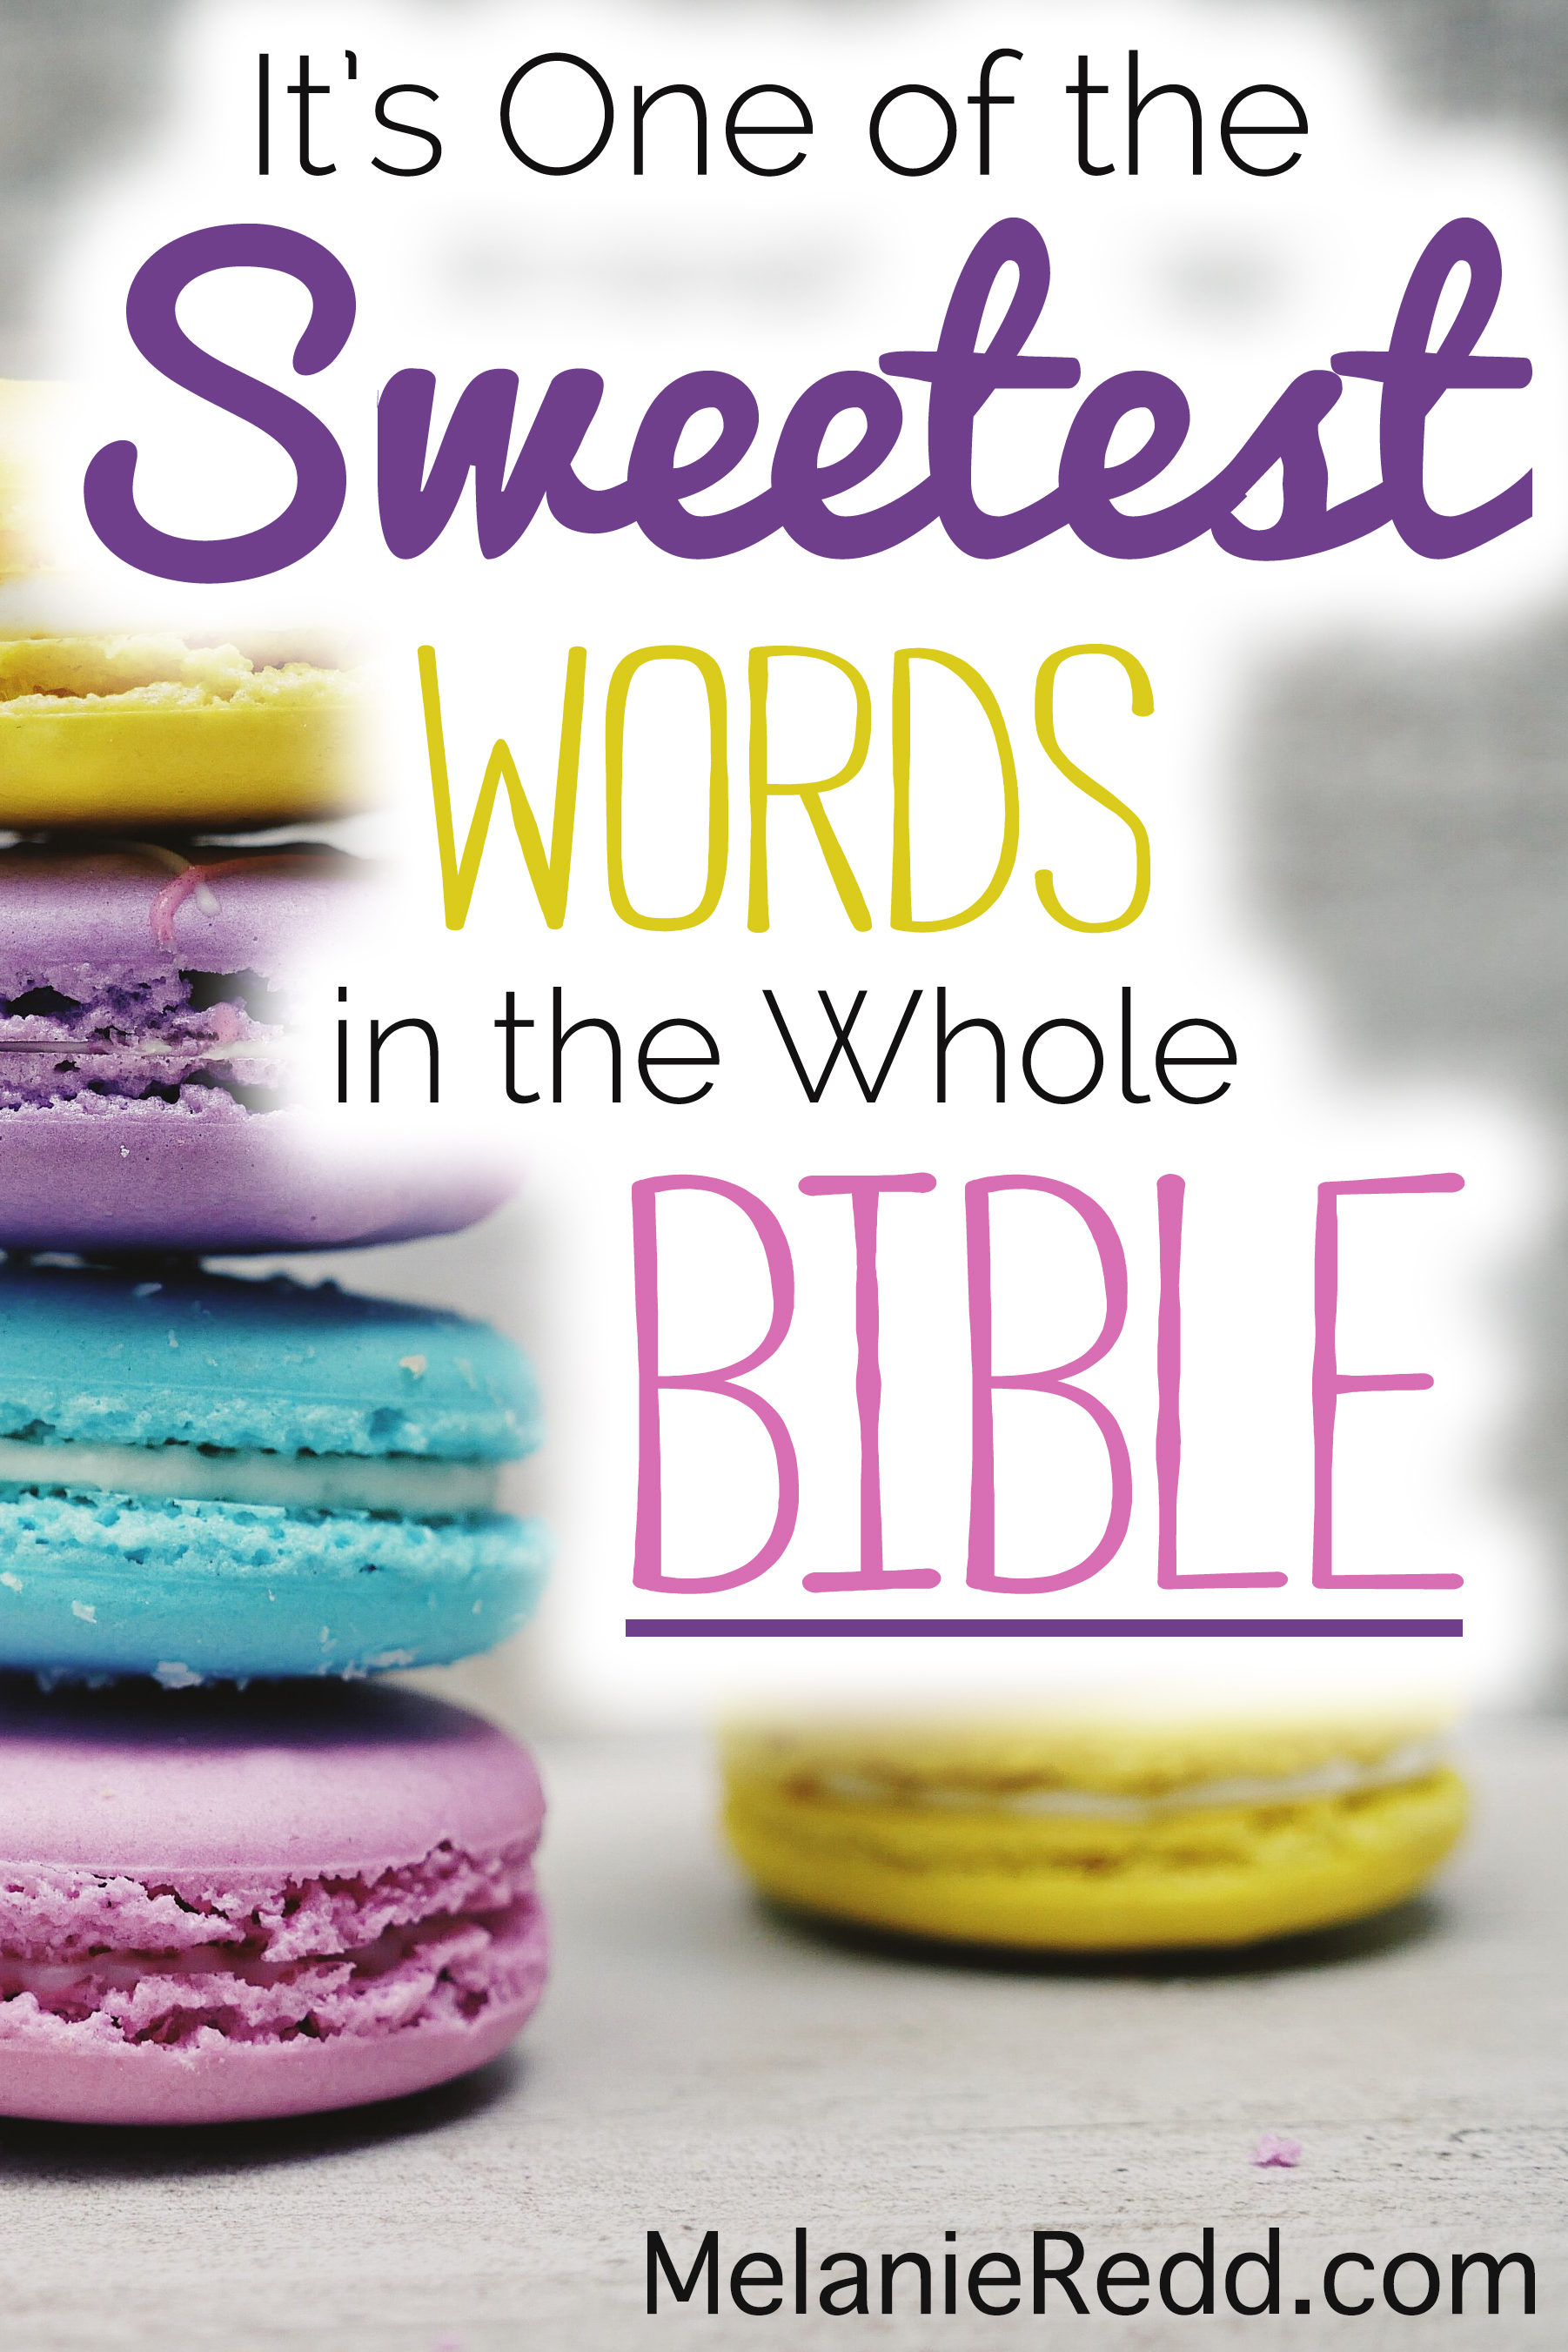 There are a lot of really sweet words in the Bible. Jesus. Life. Light. Hope. Salvation. Grace. But, this one is, to me, one of the sweetest of all. What is it? Why not drop by the blog today to find out what one of the sweetest words in all of scripture is? www.melanieredd.com.